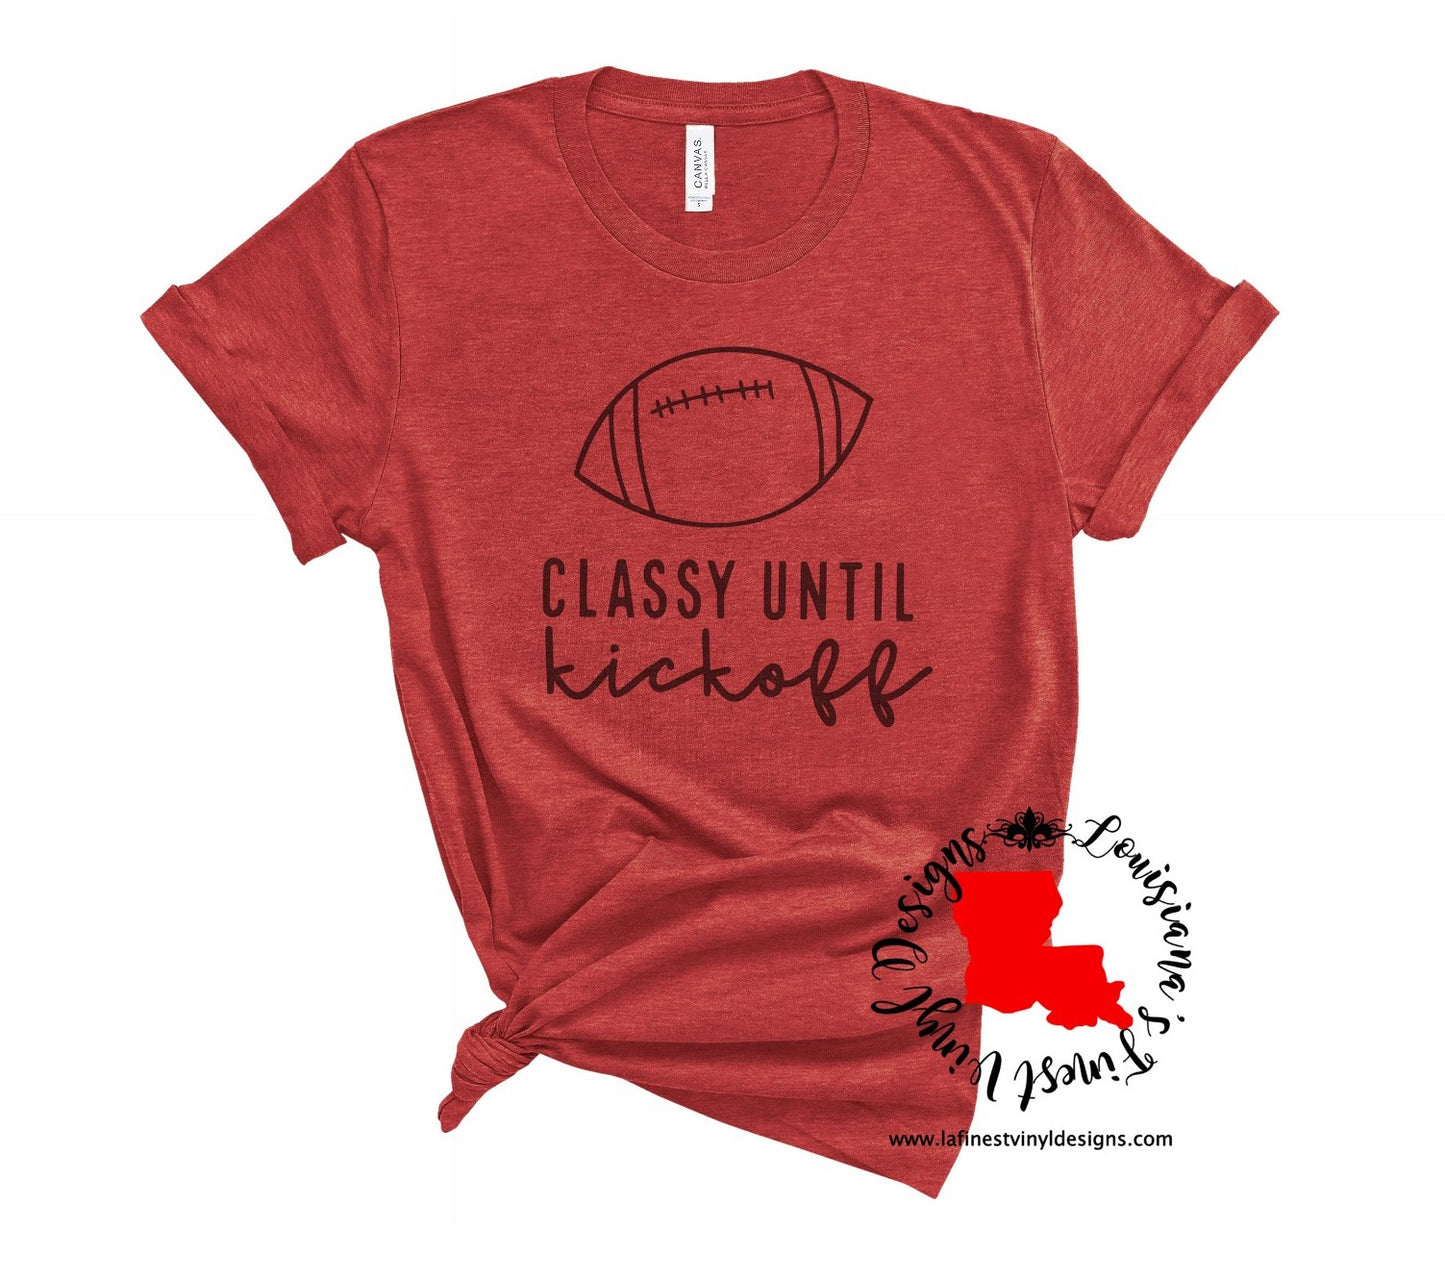 Classy Until Kickoff Tee - Red